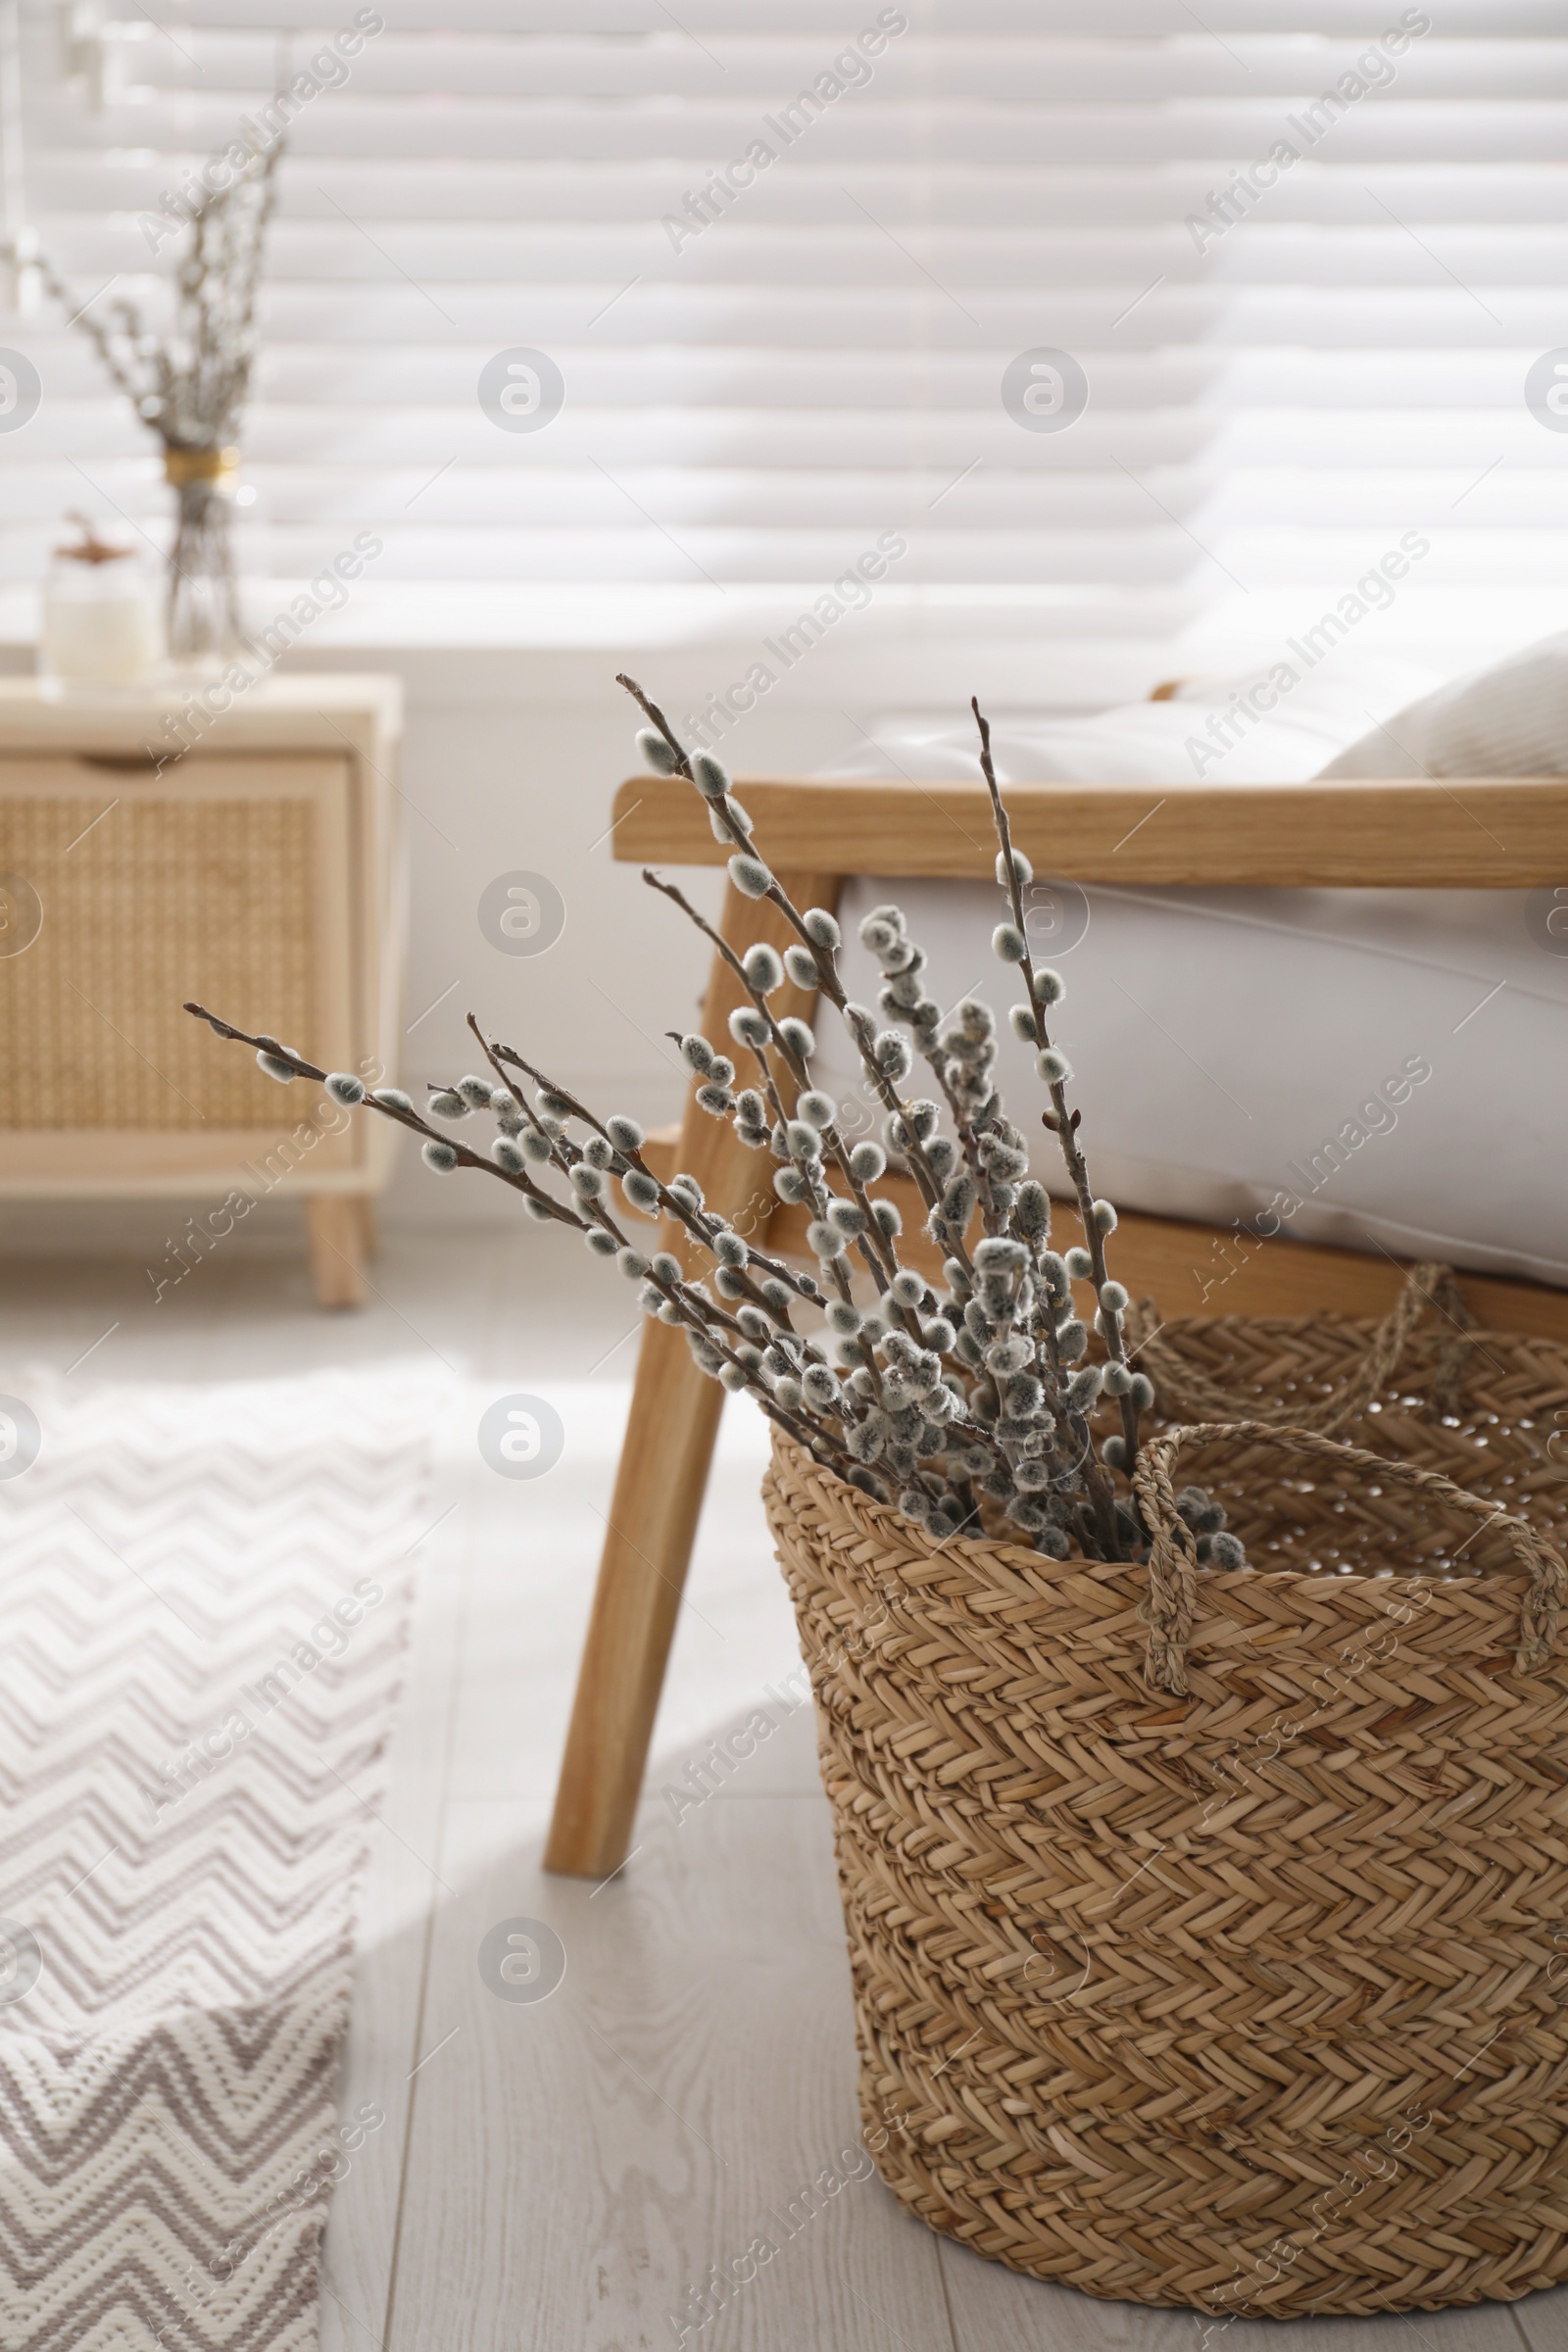 Photo of Wicker basket with pussy willow tree branches near armchair in room